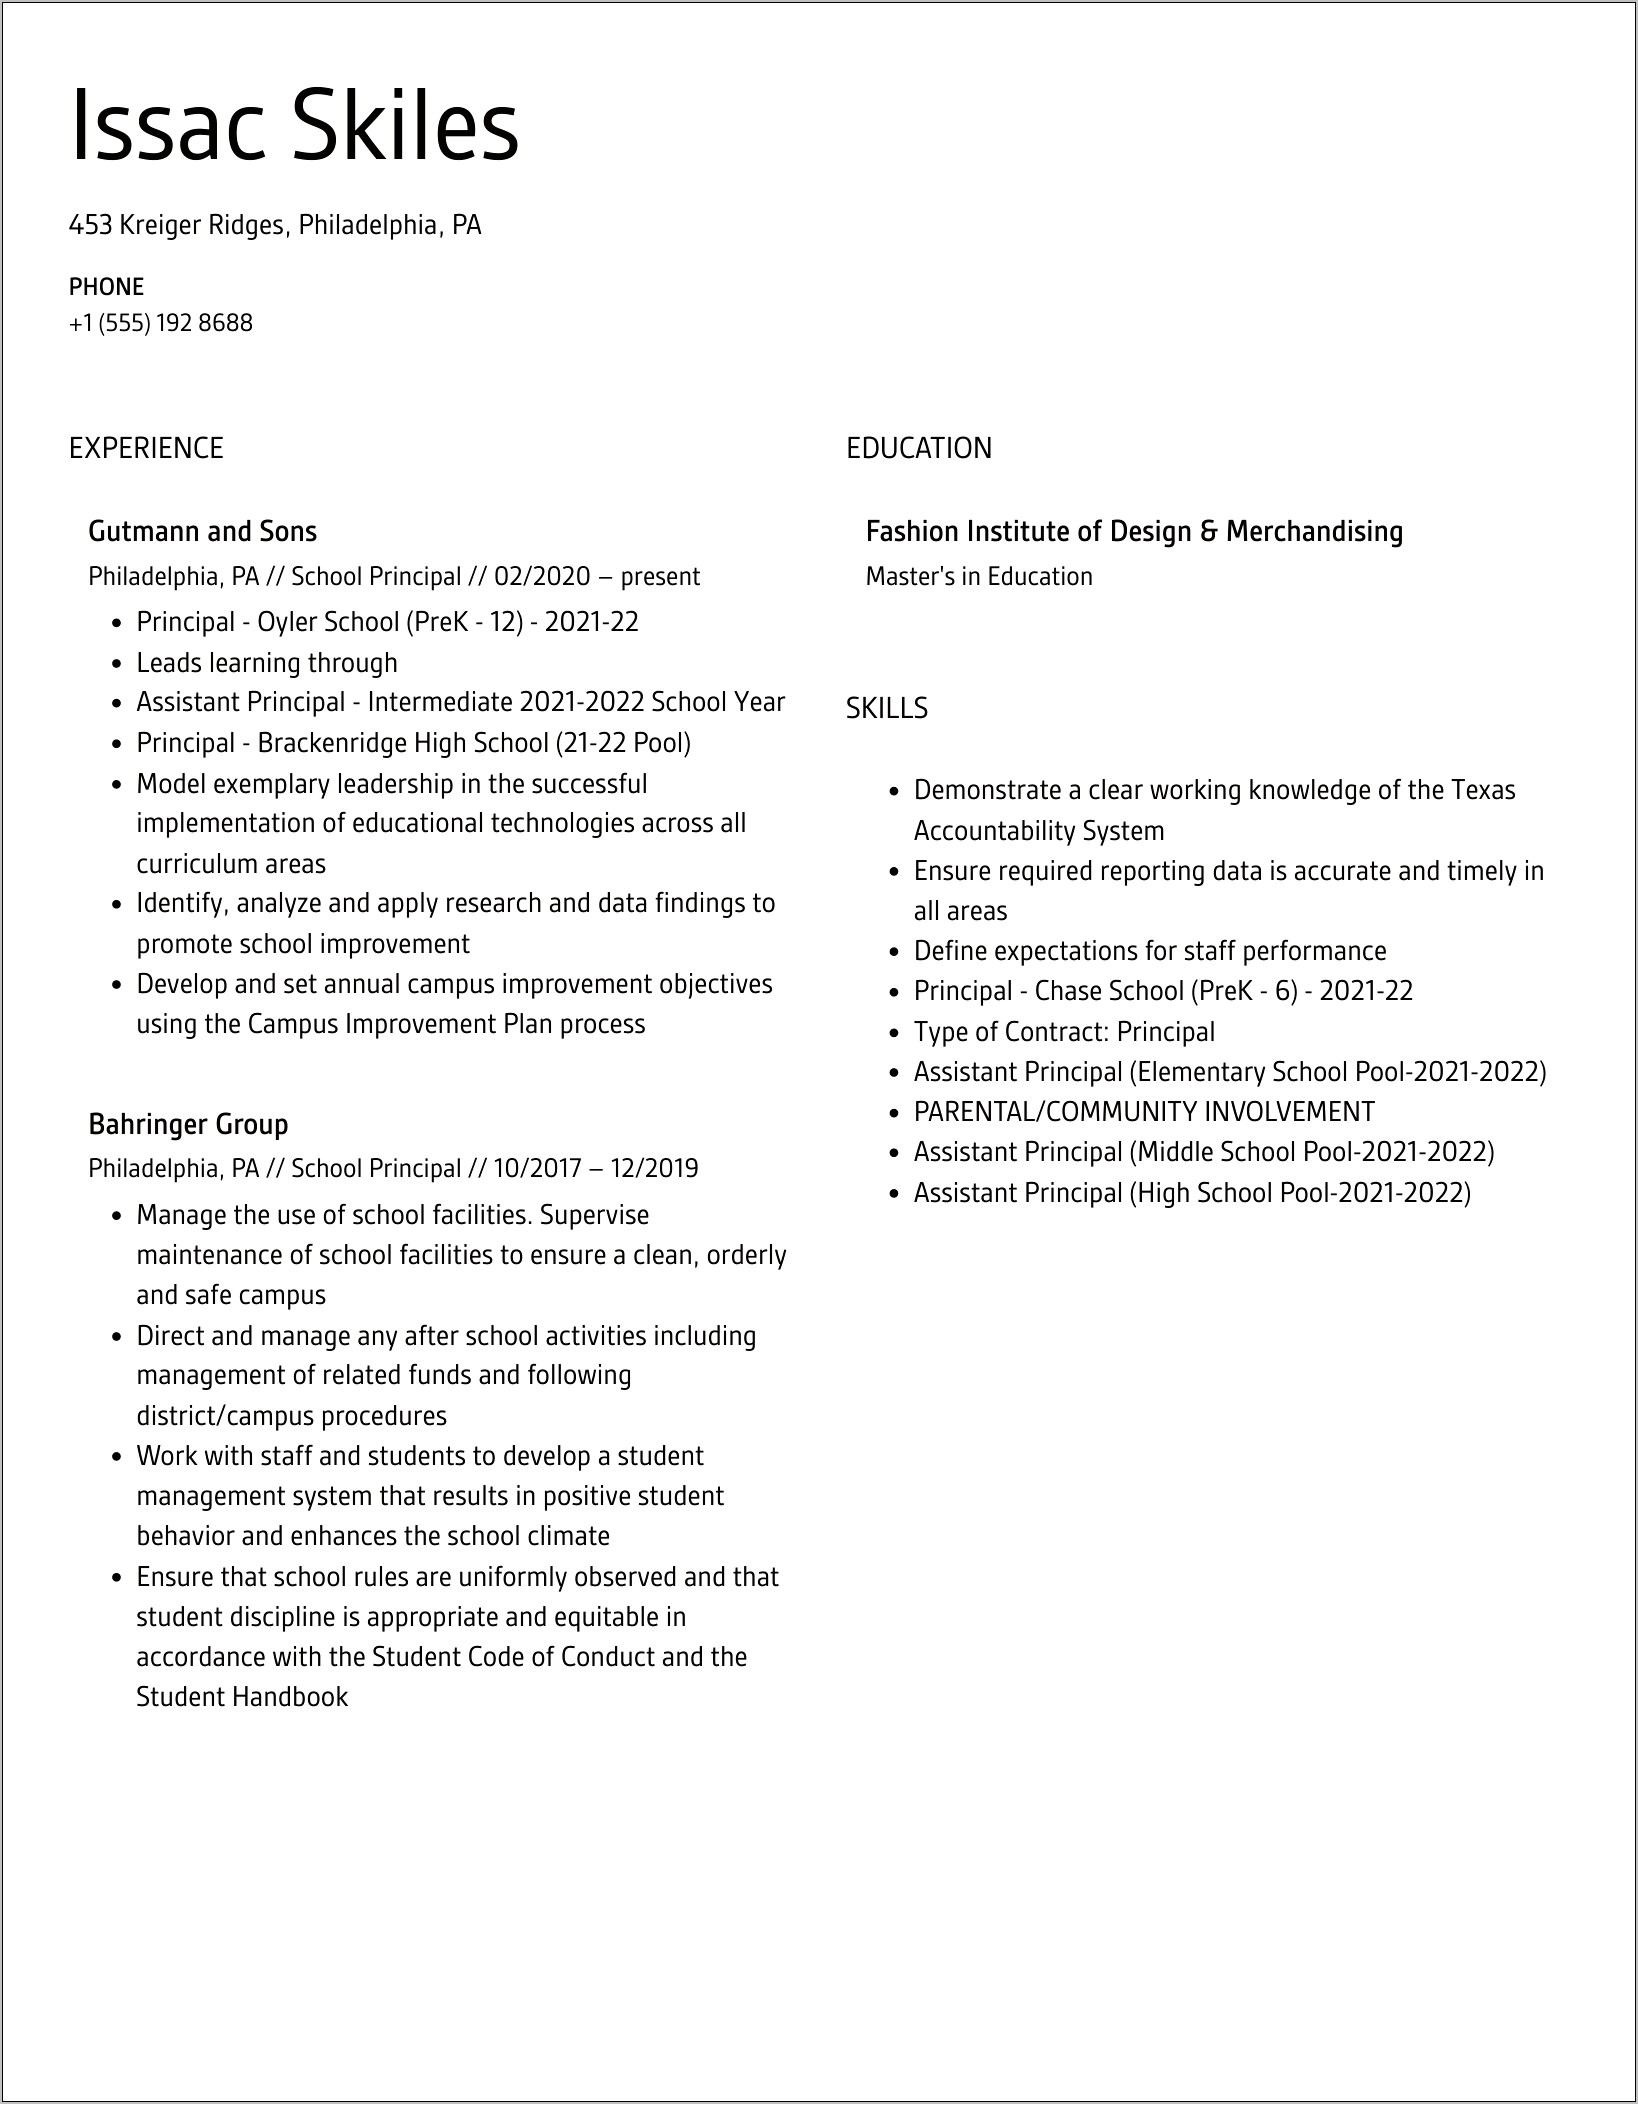 Assistant Principal Resume Objective Examples